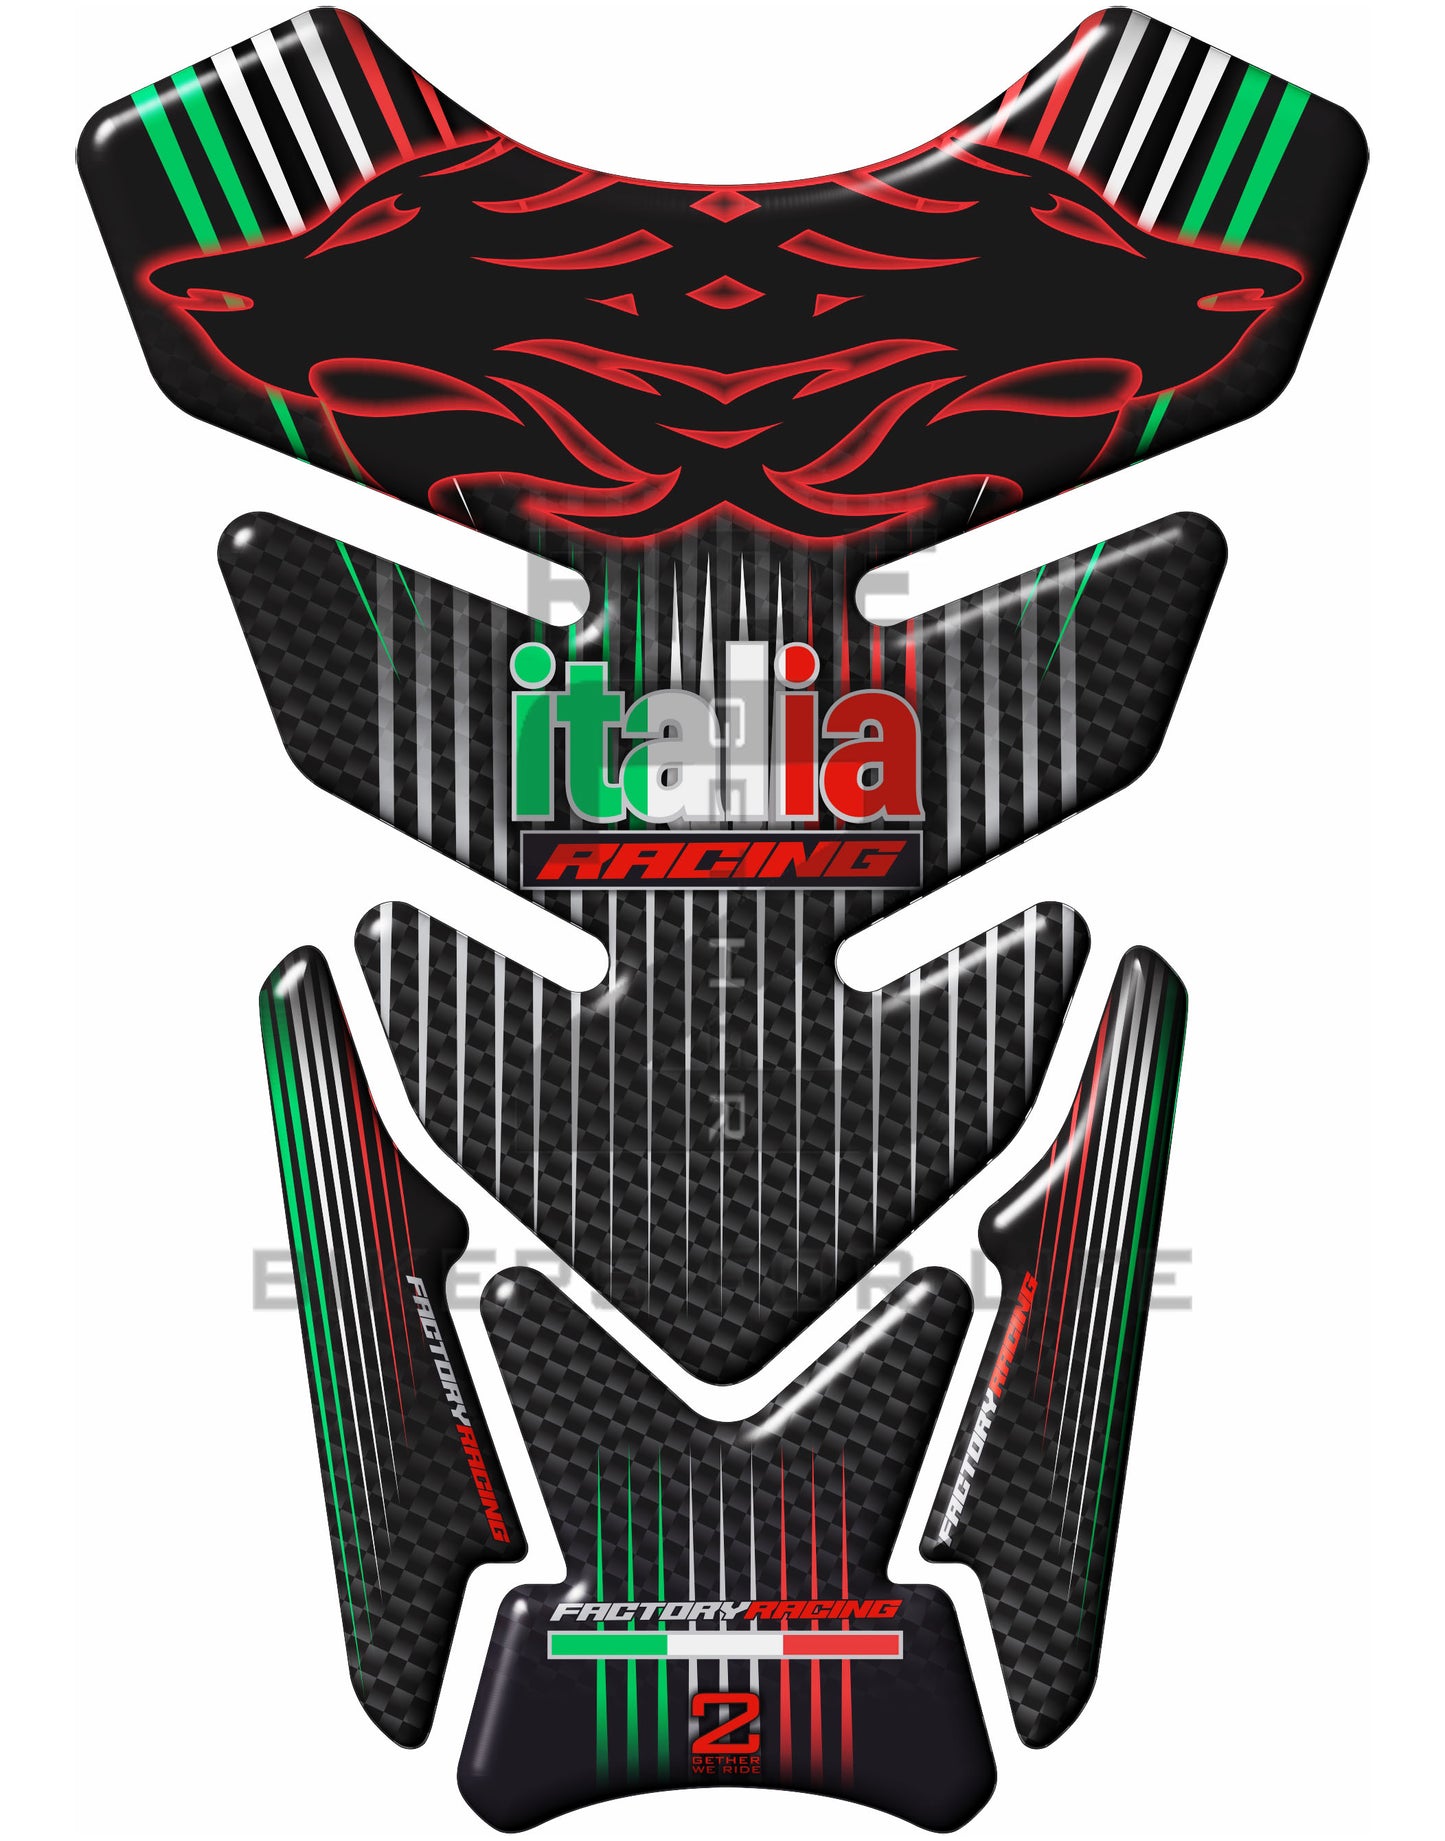 Aprilia  RSV 1000 - MILLE - RS250 - RSV4 - RSV4R - FALCO etc Italia Factory  Racing  Black and Red Universal Fit  Motor Bike Tank Pad / Protector. Fits most models